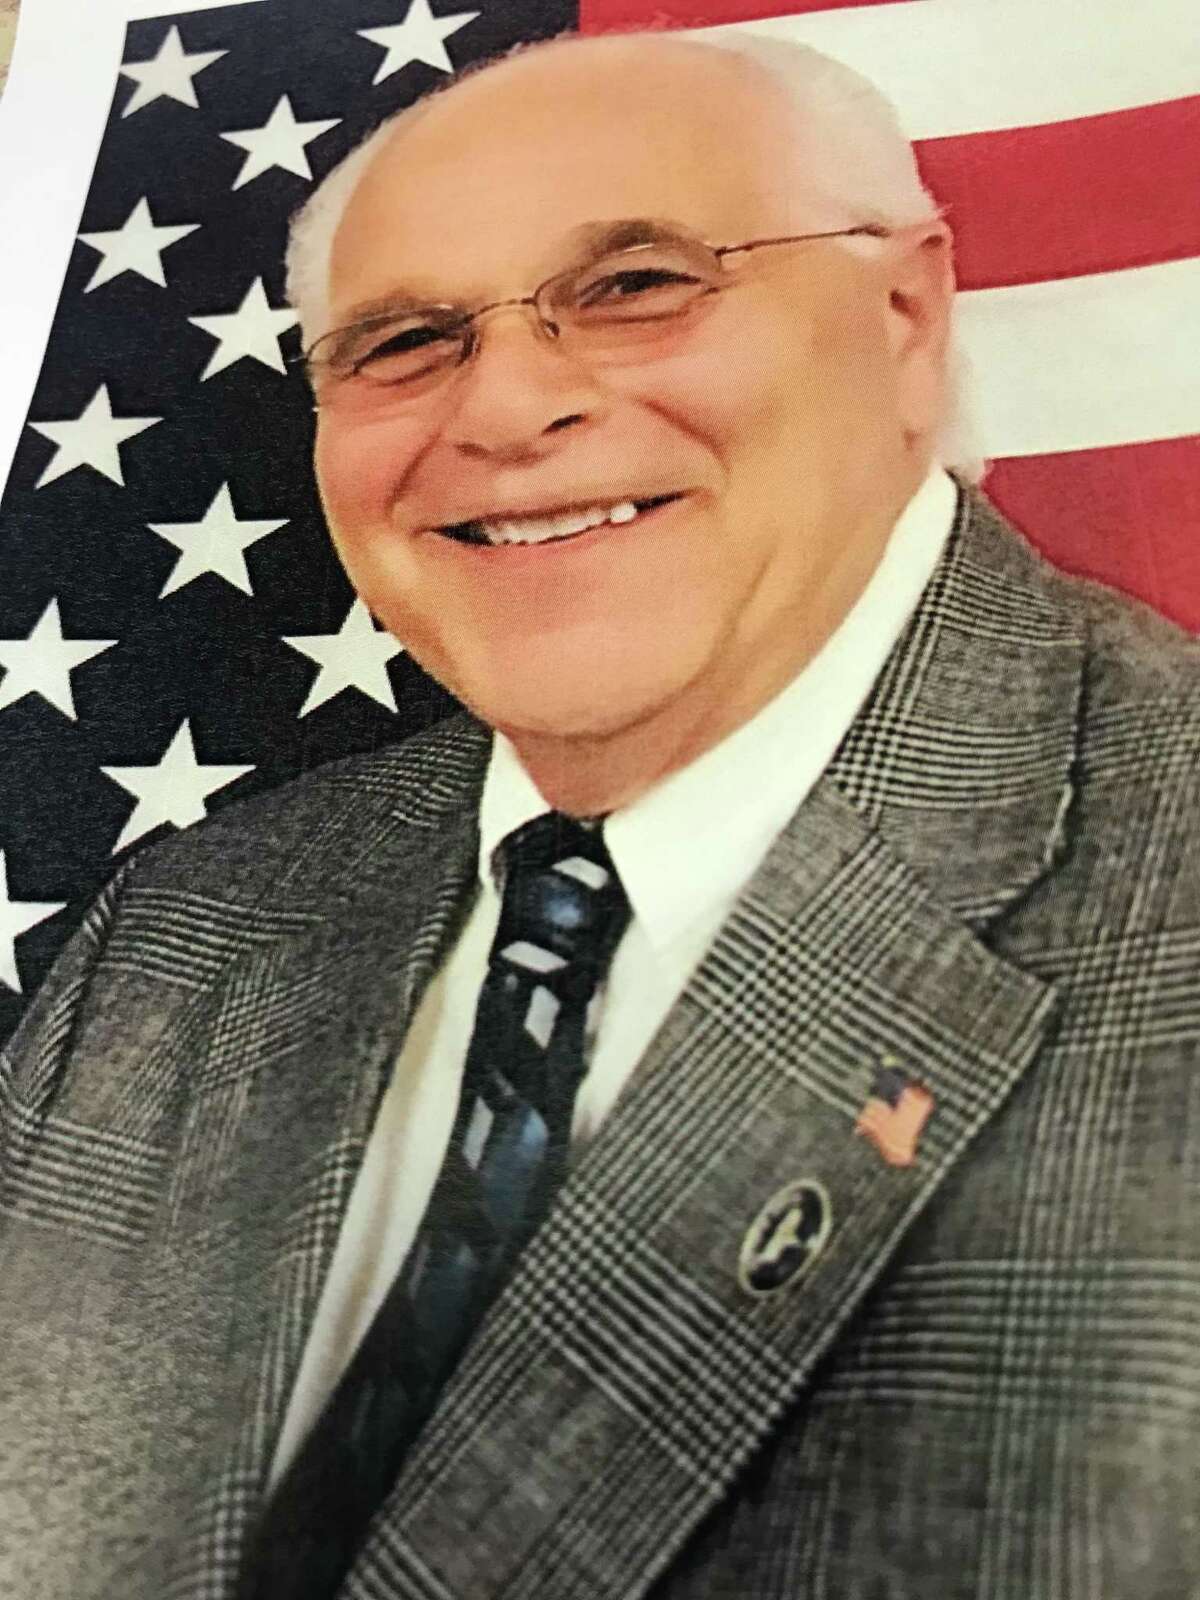 East Haven small businessman Sal Maltese announced Thursday, April 18, 2019, that he will run for mayor for a third time, this time as a Republican. Maltese previously has run against Mayor Joseph Maturo Jr. as an independent in 2015 and a Democrat in 2017, after failing to get the 2015 Republican nomination.